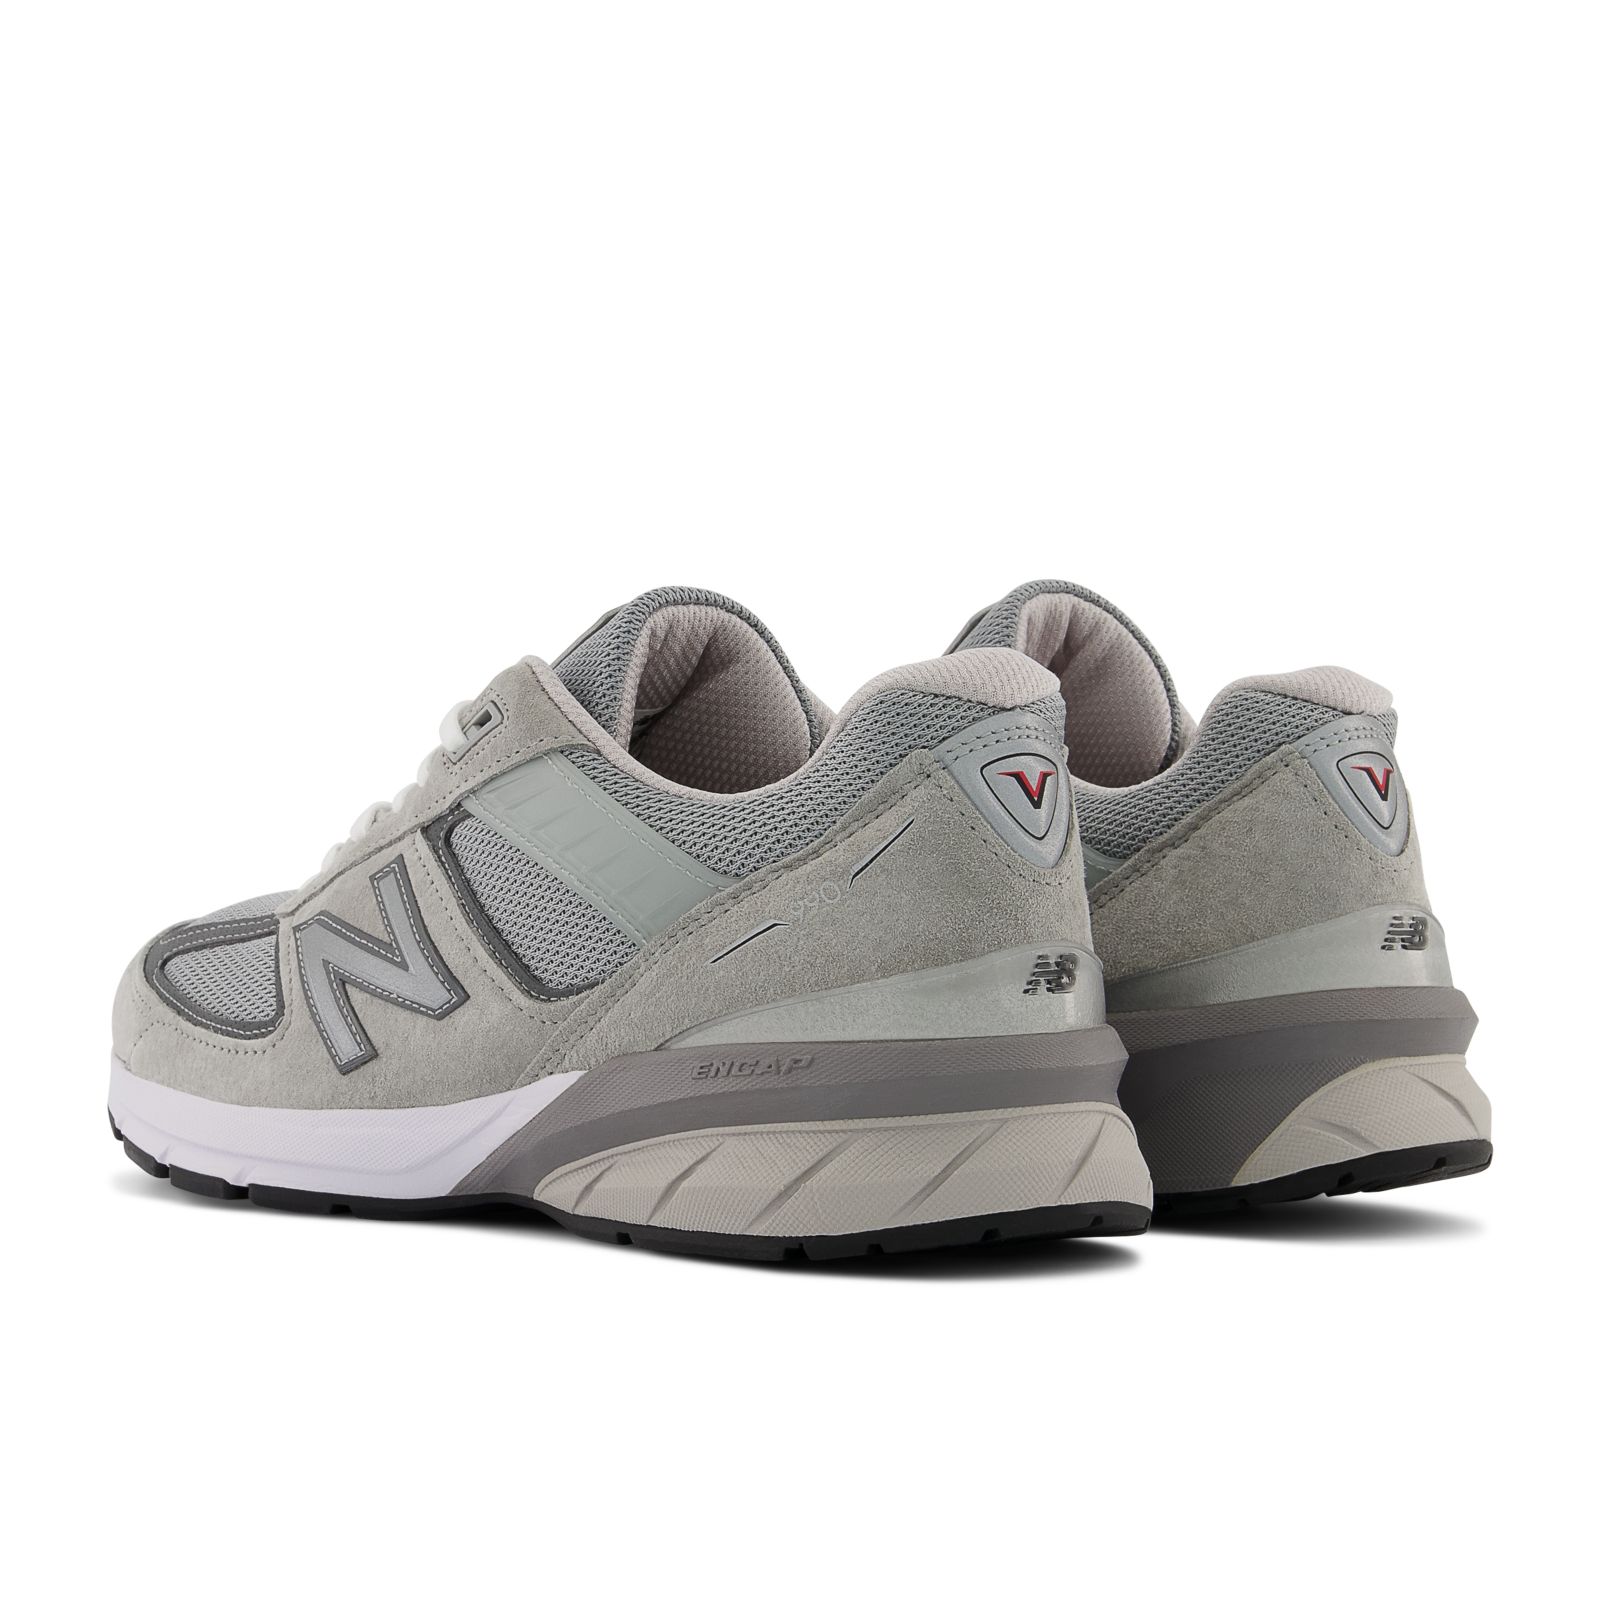 Men's MADE in USA 990v5 Core Lifestyle - New Balance